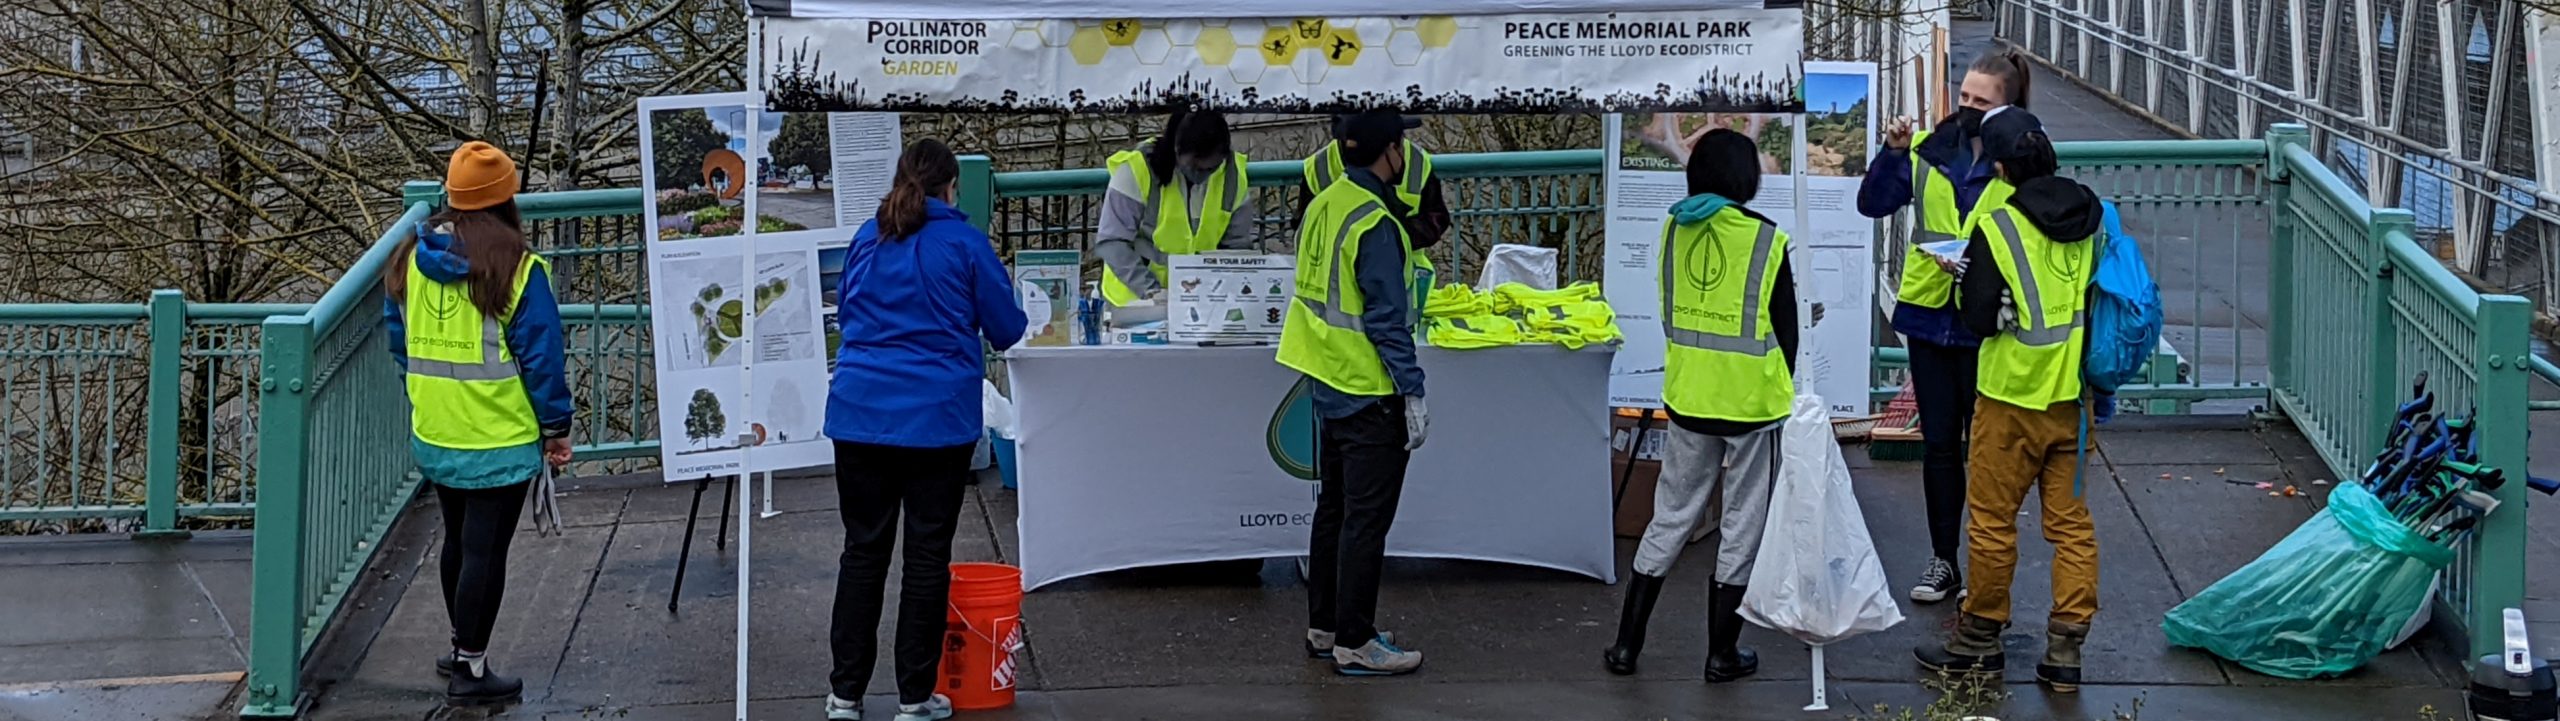 a group of volunteers wearing green safety vest check in at a table outside